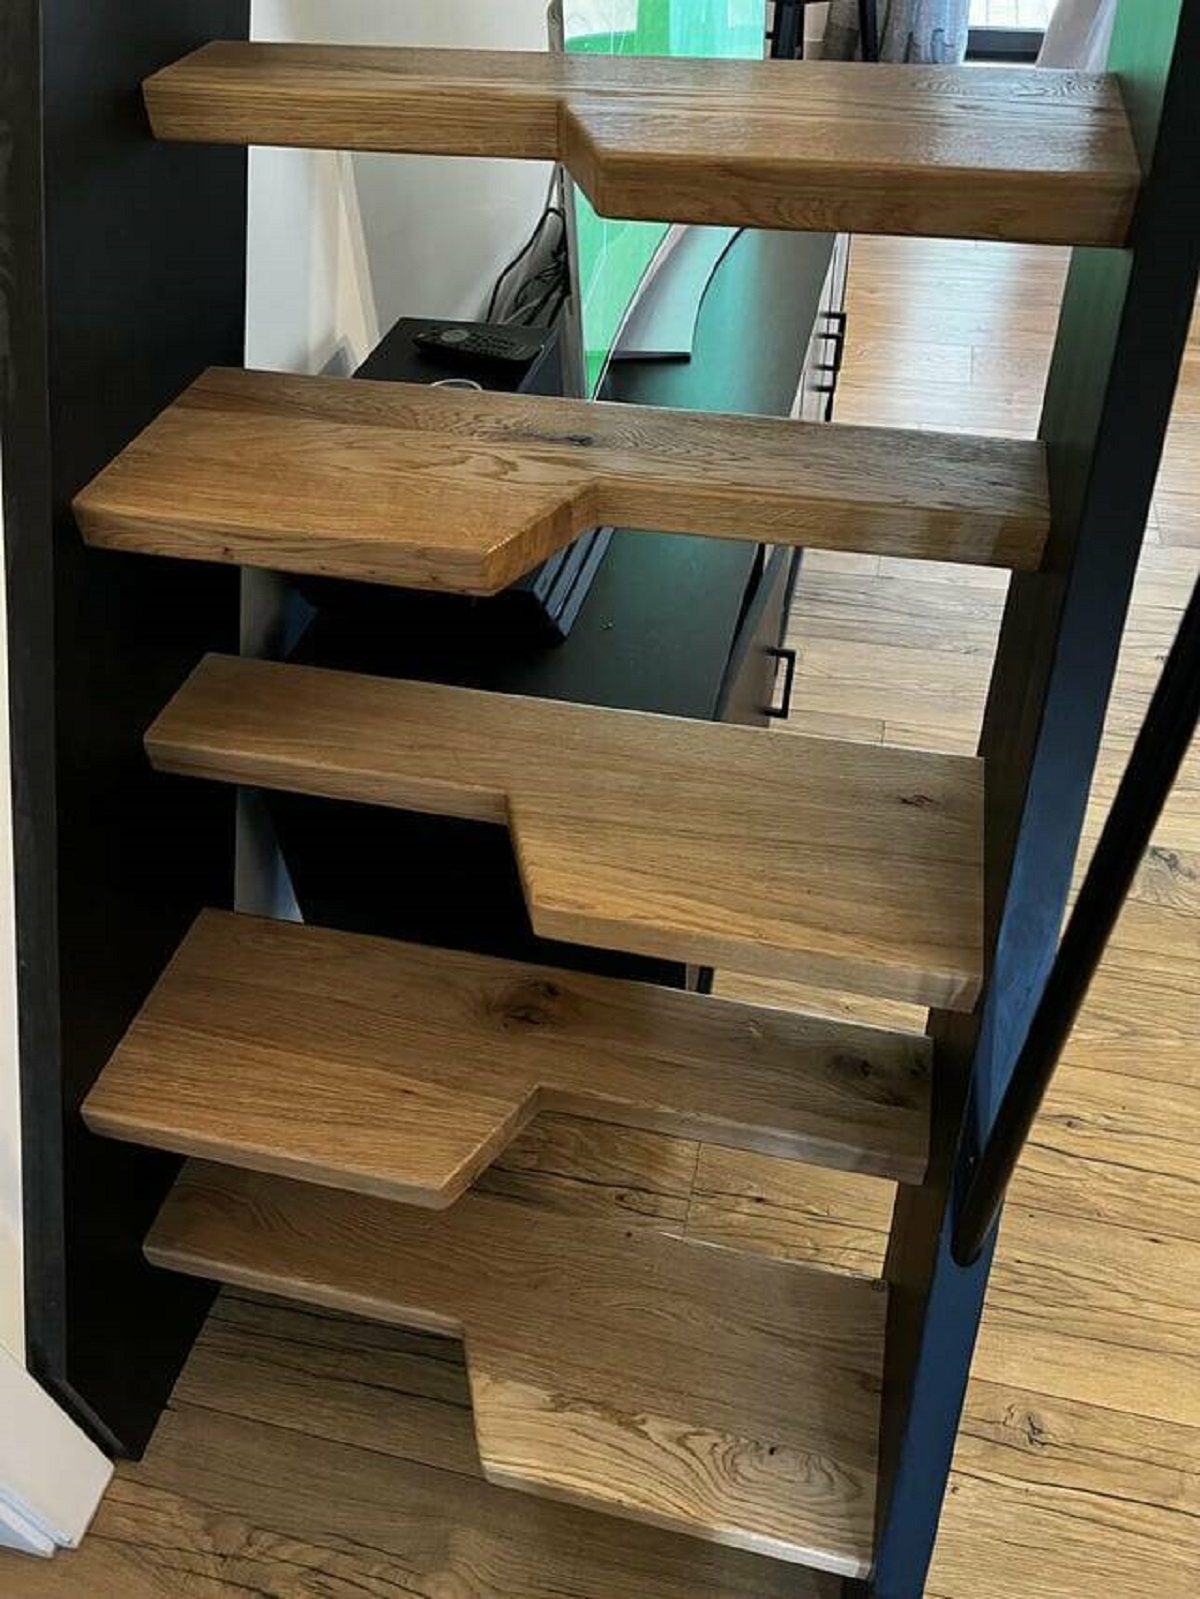 "This space saving staircase has alternating half steps"